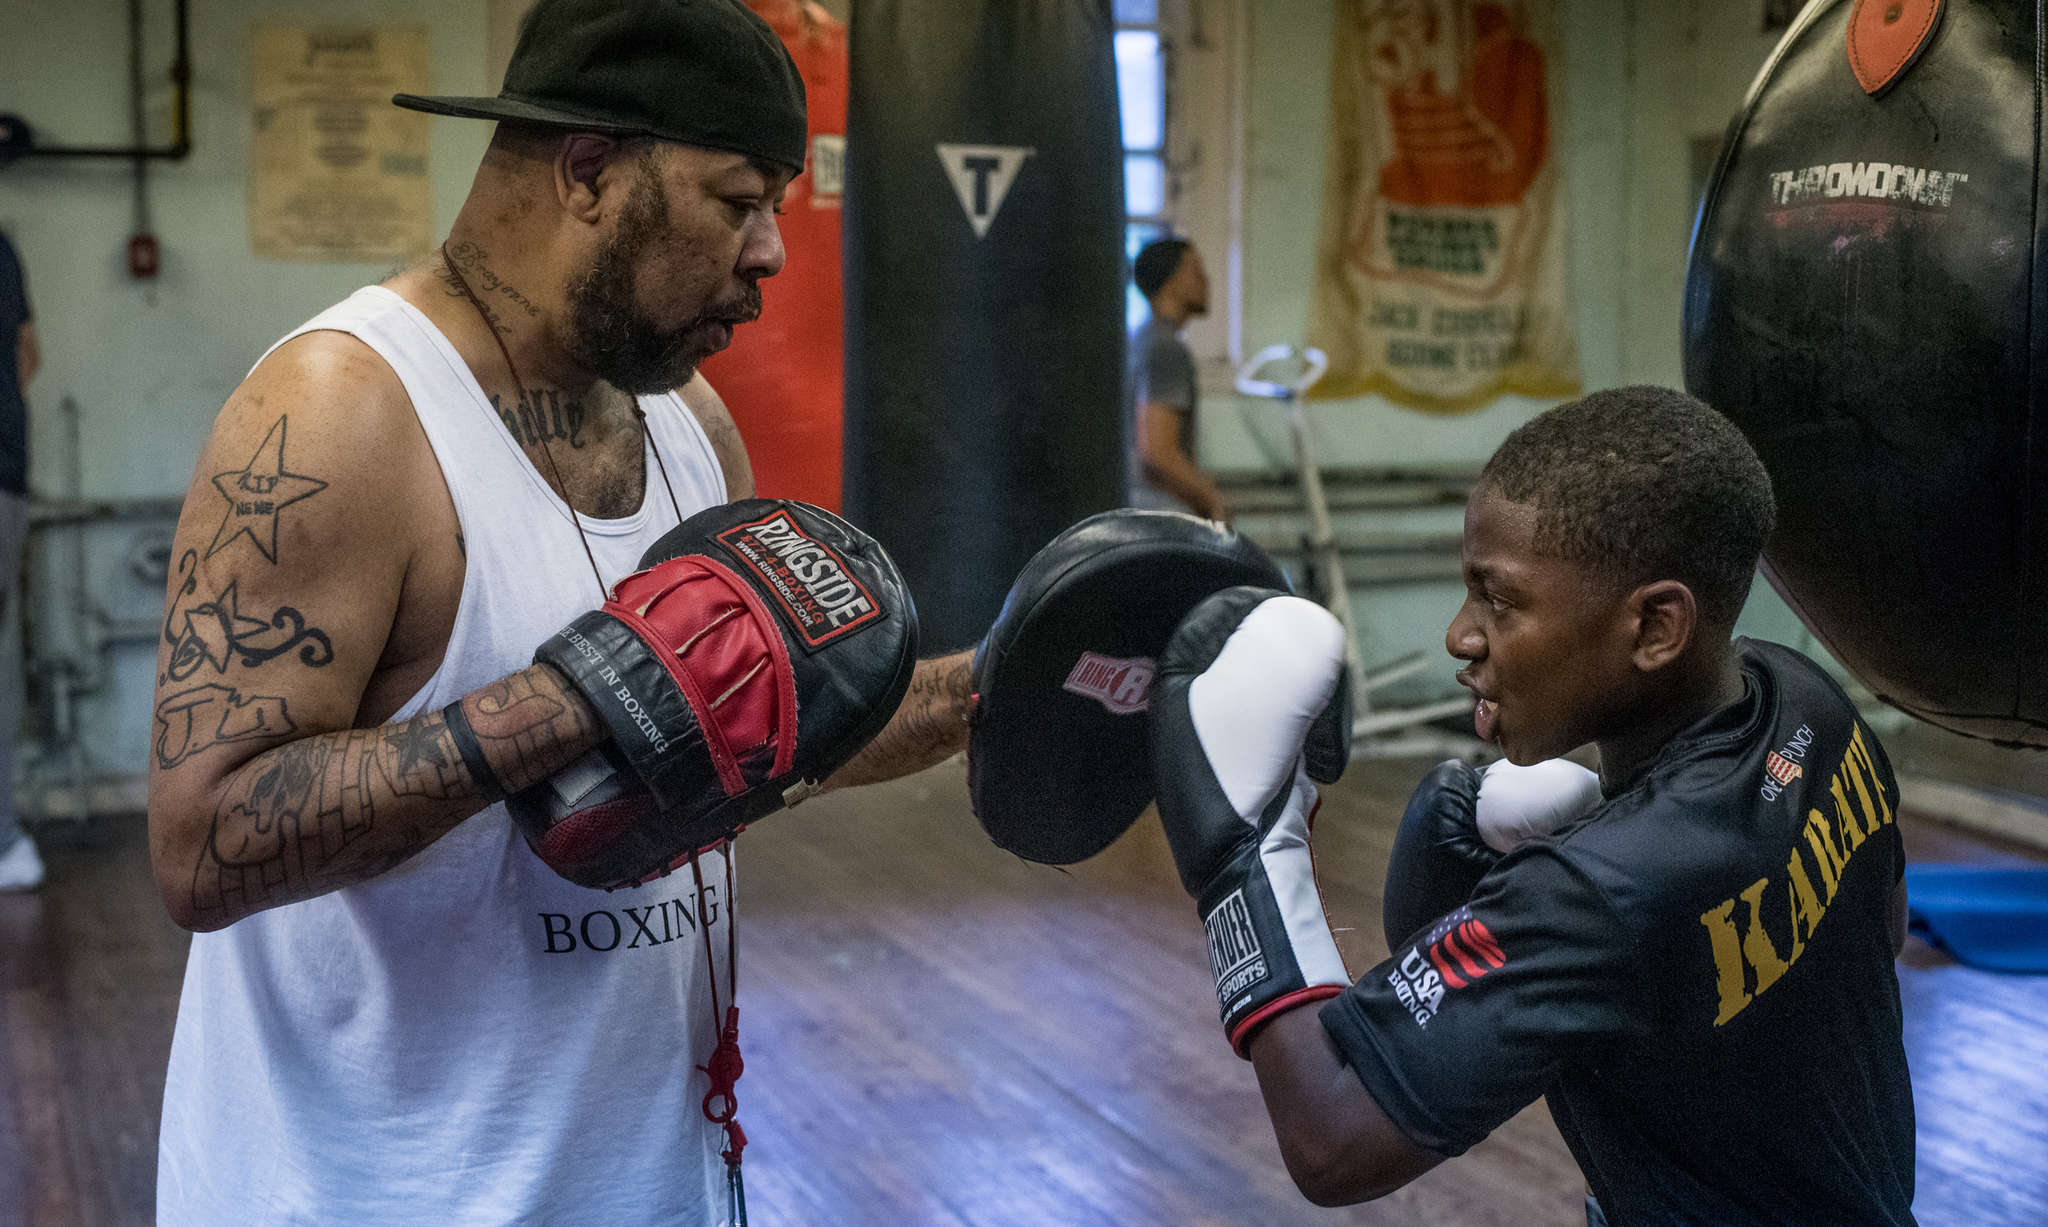 At Philly boxing clubs, retro sport takes on modern ills photo